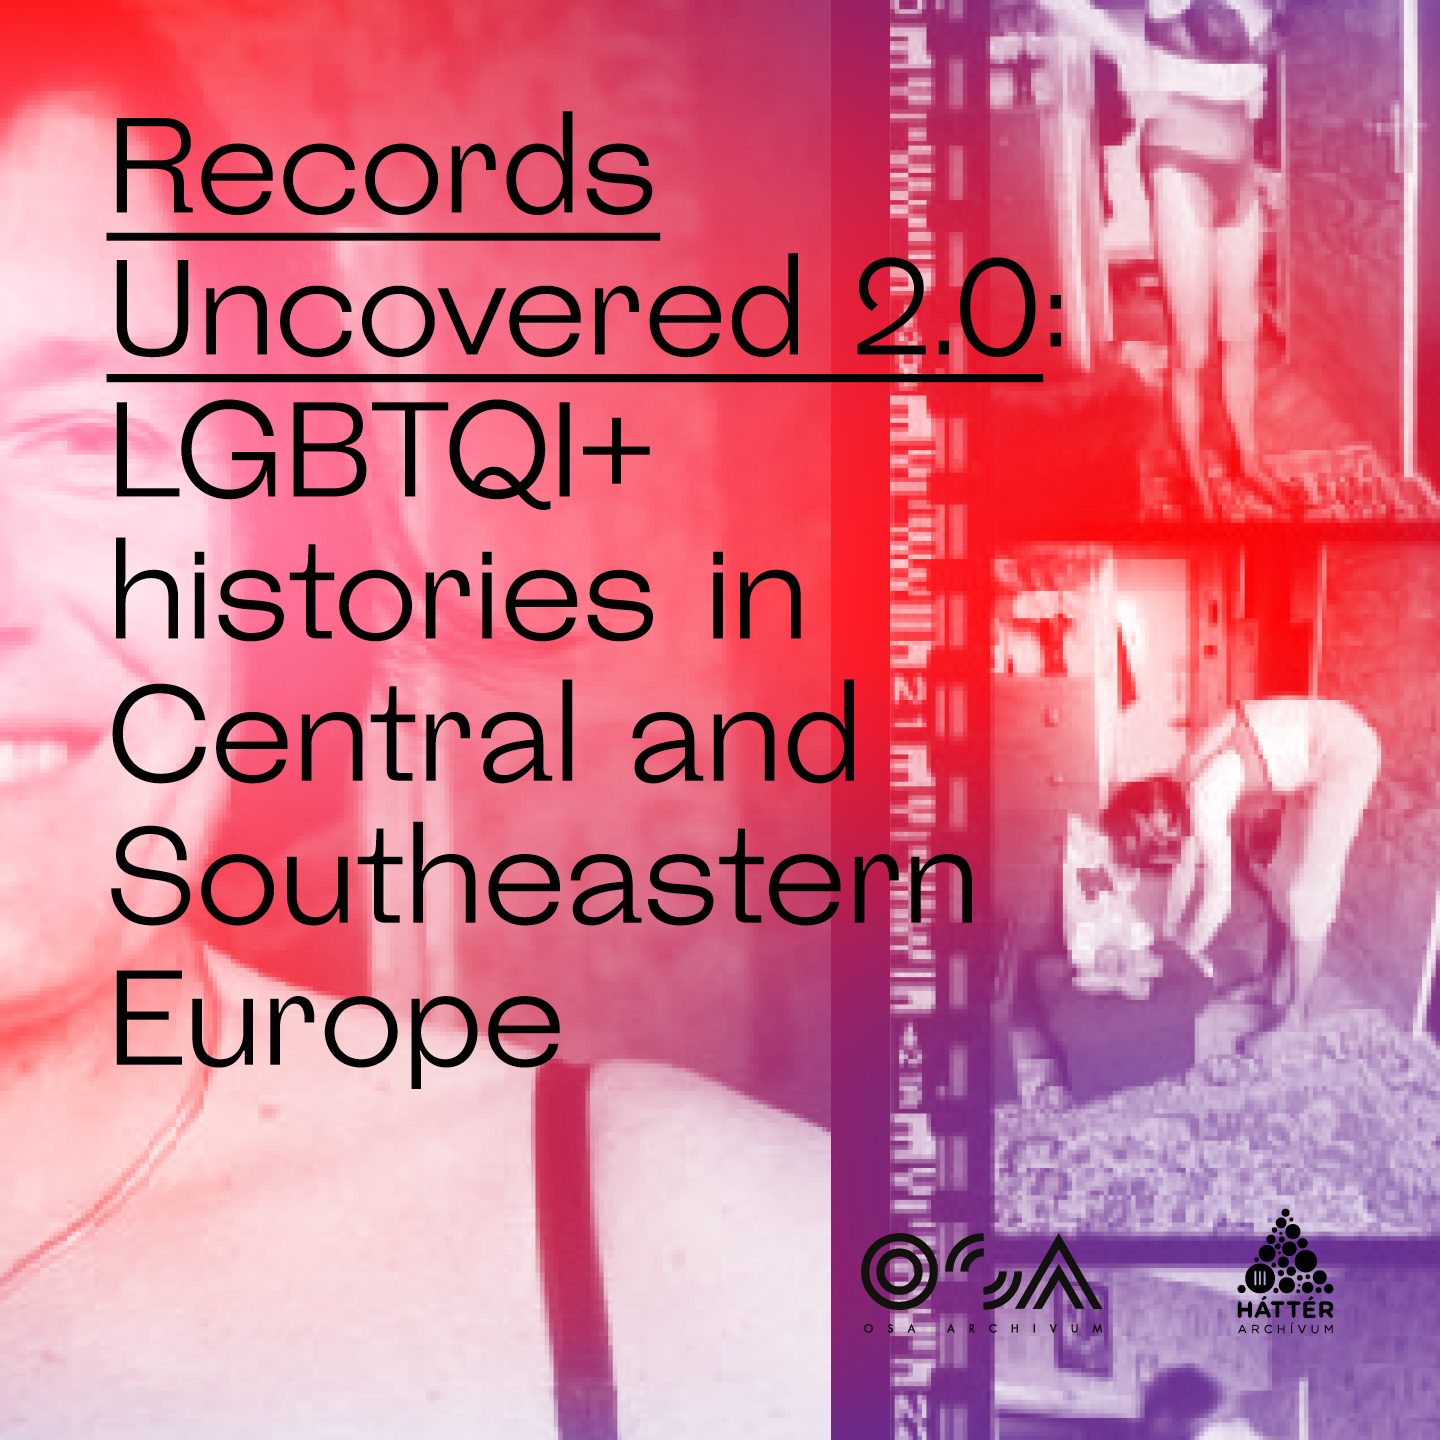 Records Uncovered 2.0